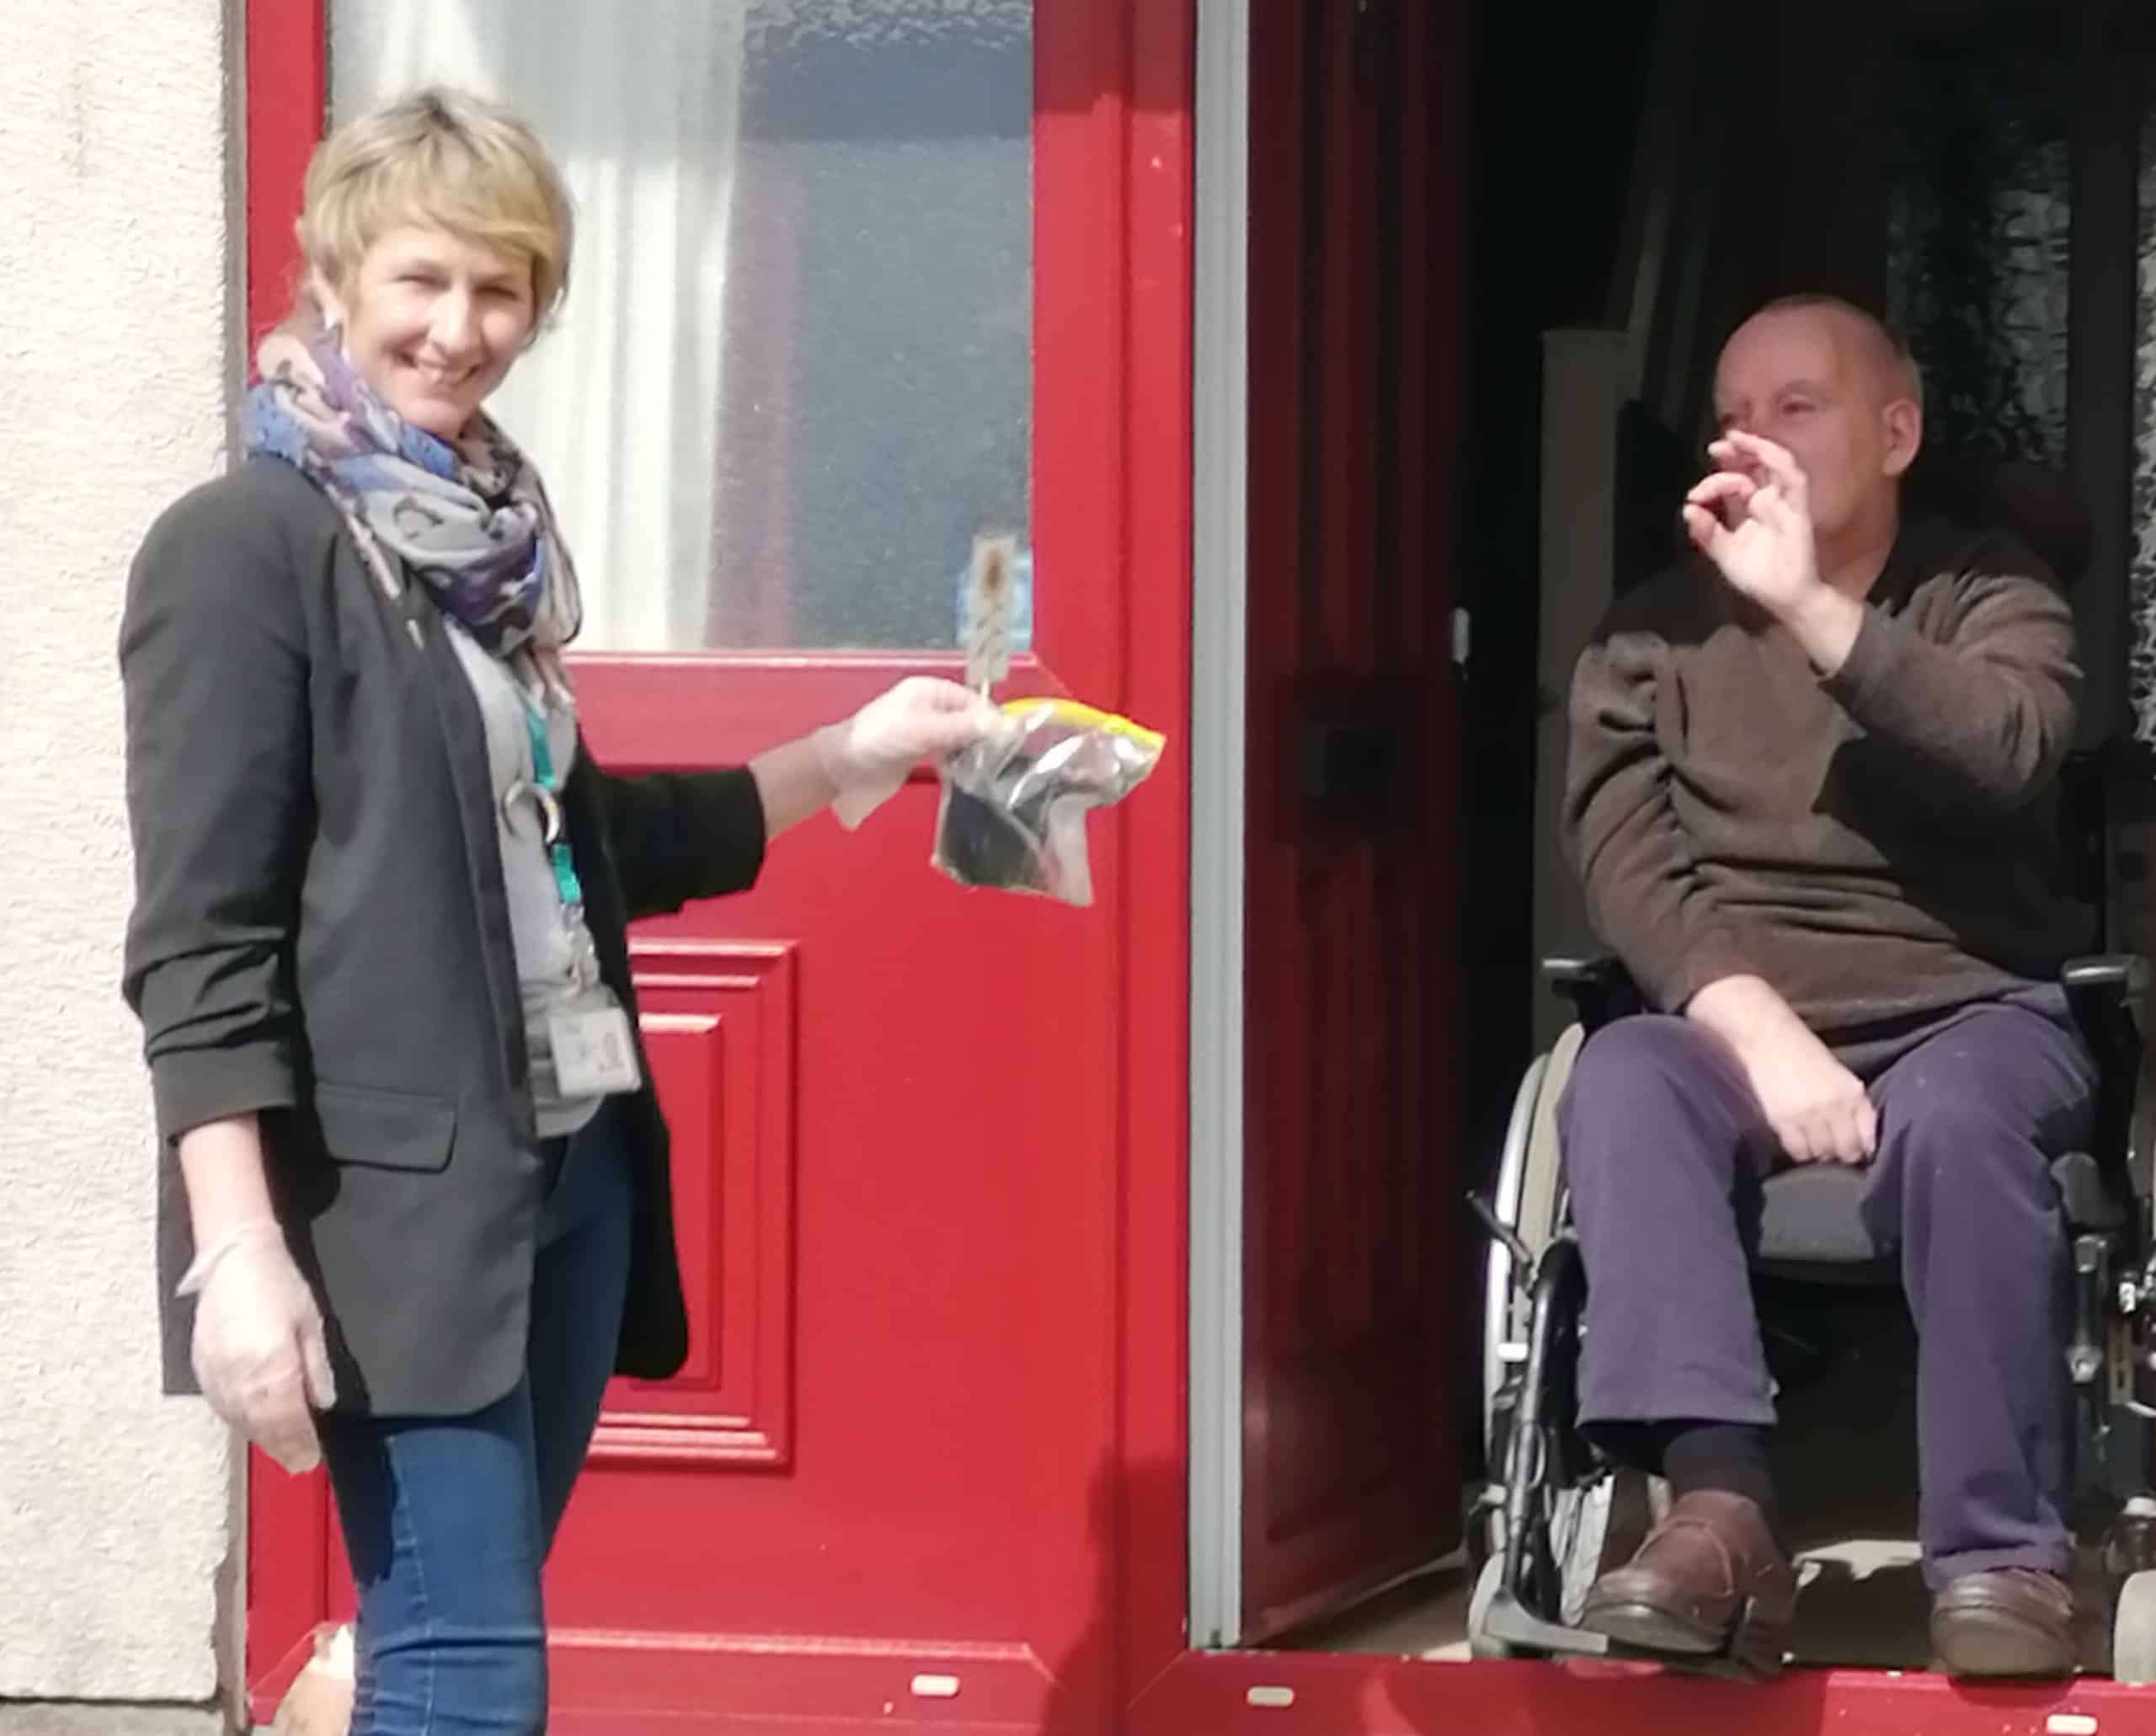 IWA’s frontline workers in Clonakilty supporting people with physical disabilities in their homes